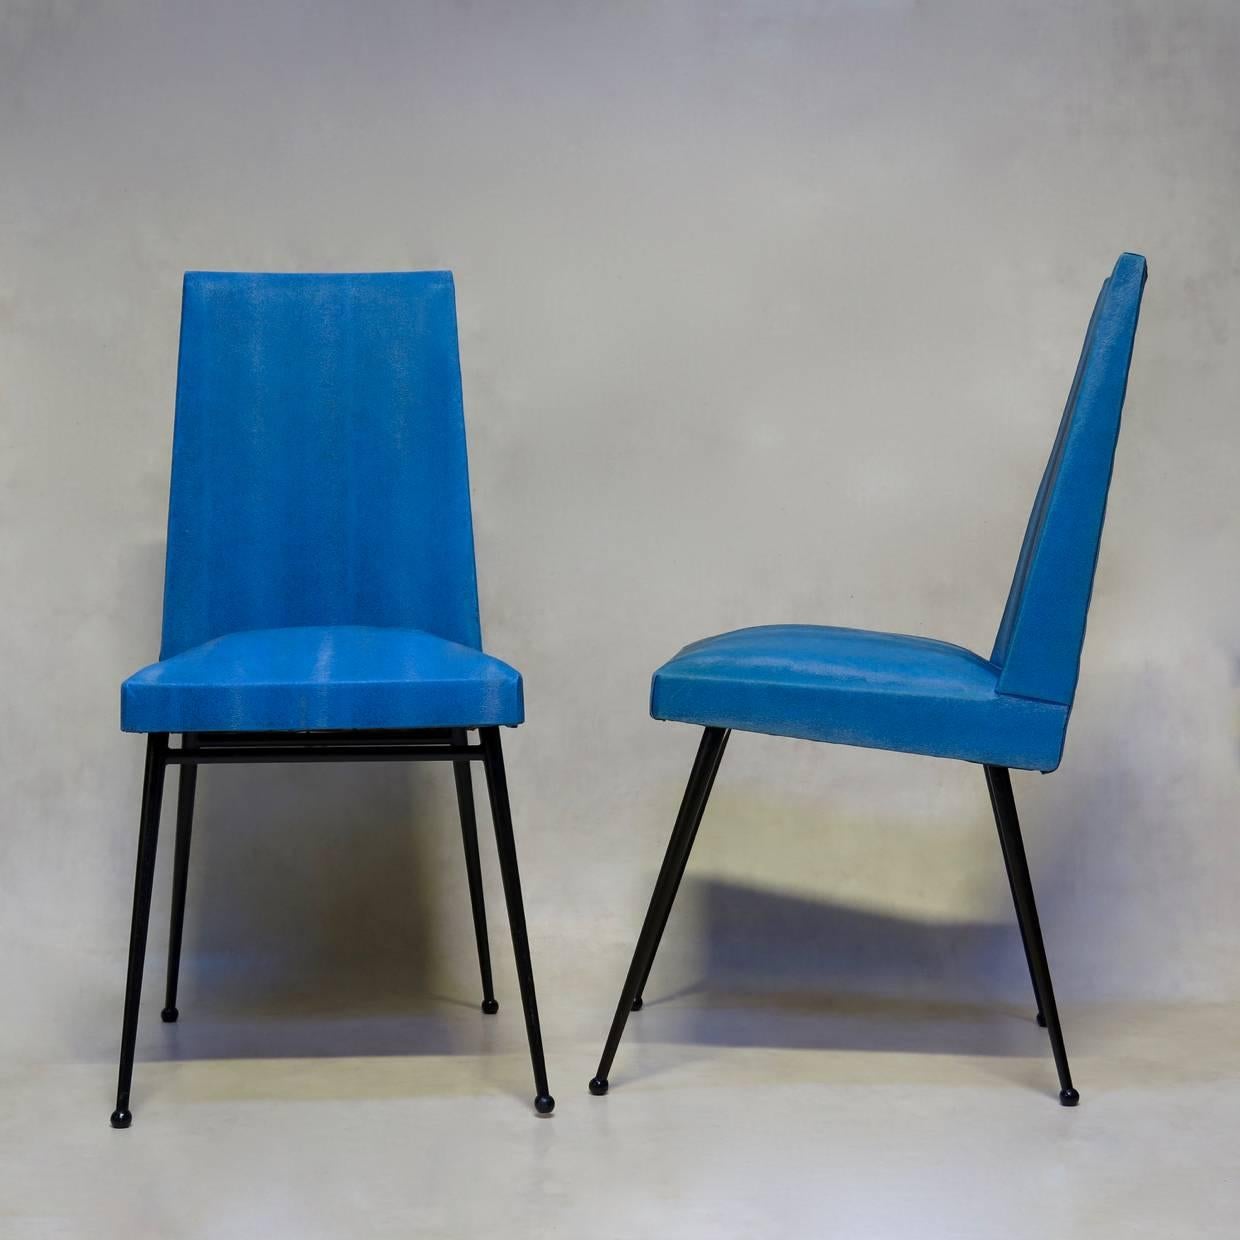 Nice set of four dining chairs with nice, graphic lines. Upholstered in textured blue vinyl.